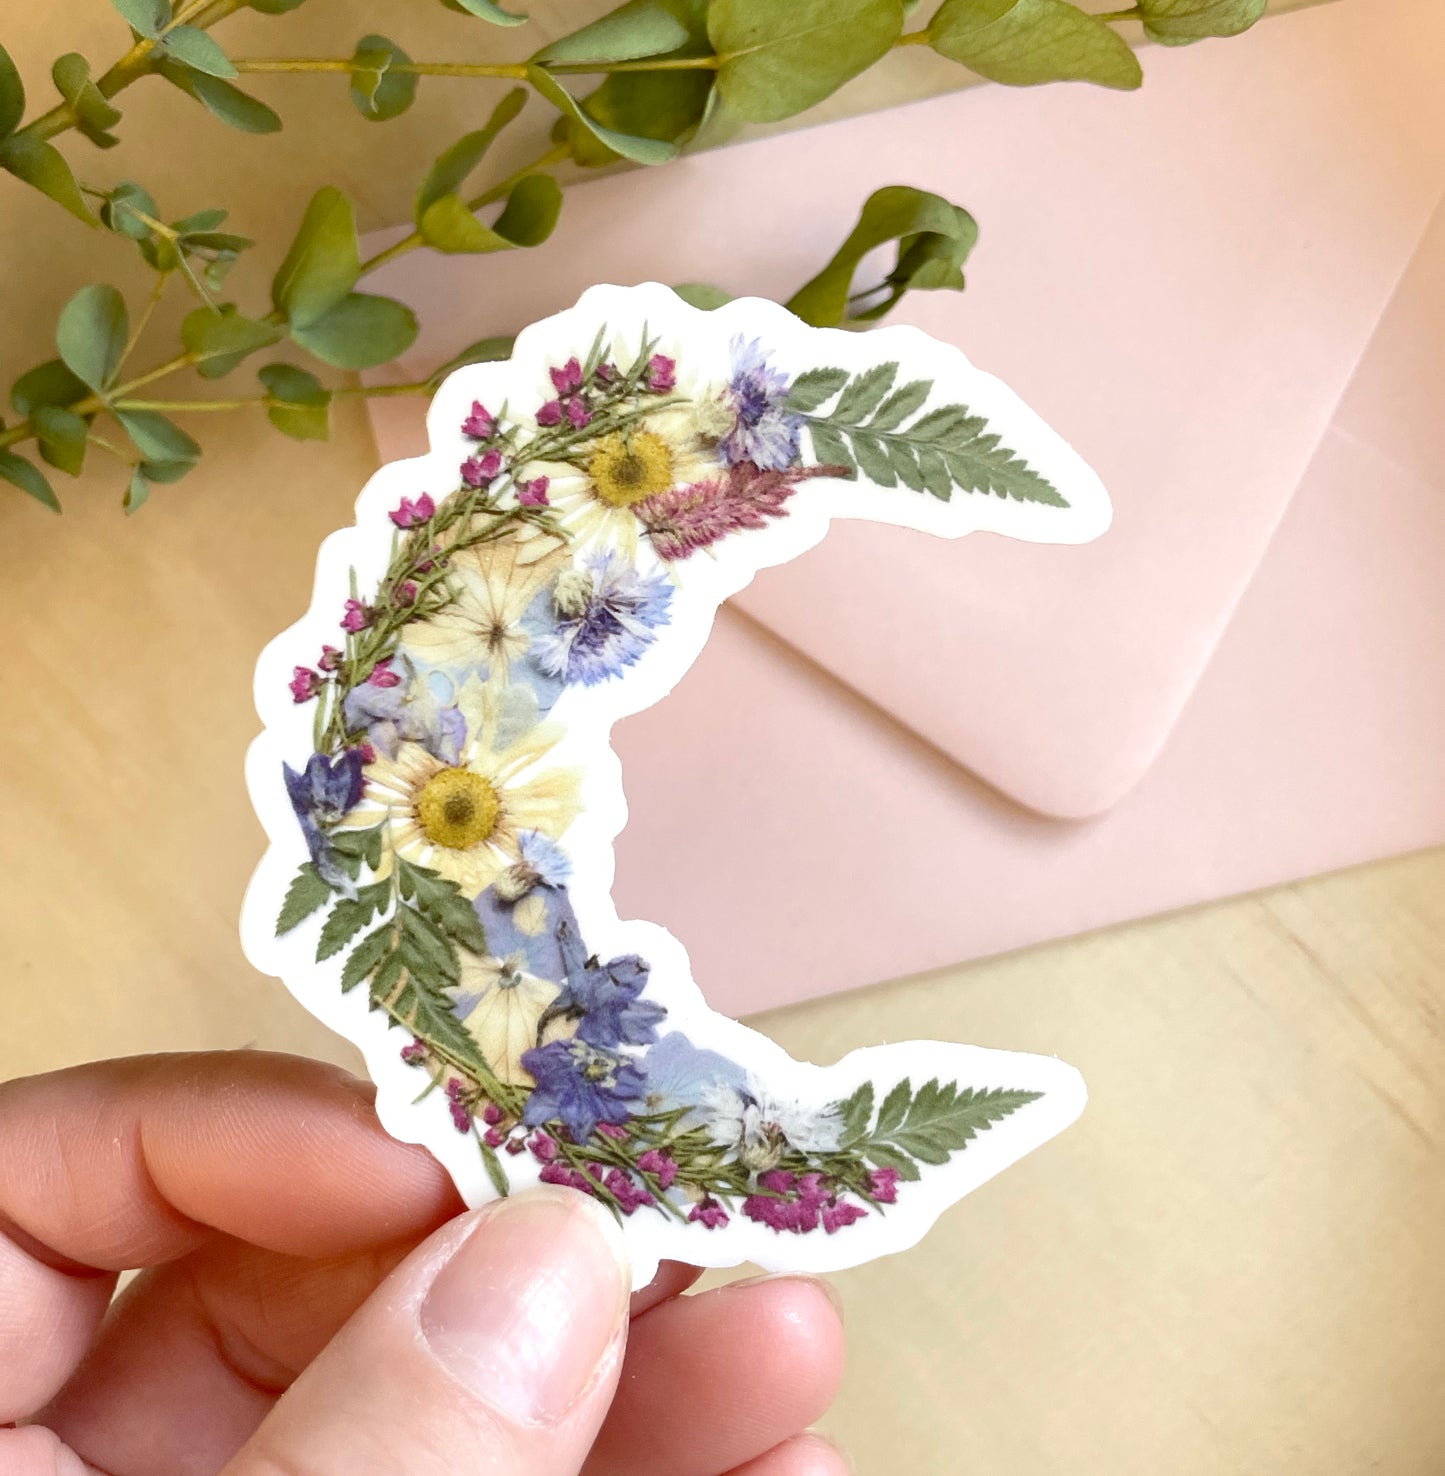 sticker of floral crescent moon made with dried pressed flowers. 